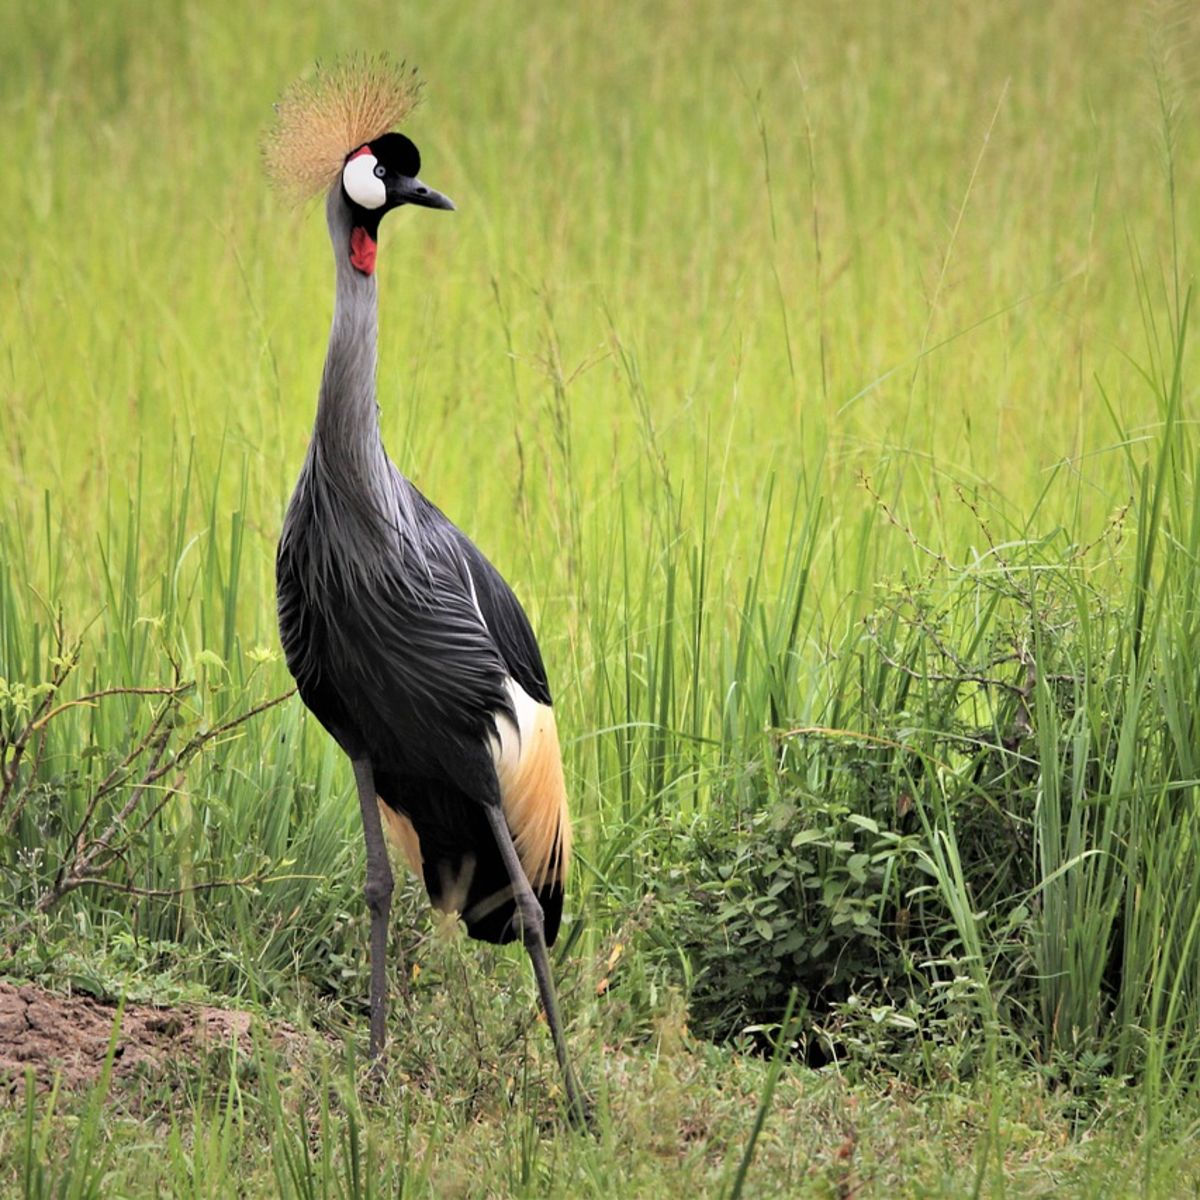 Grey crowned crane standing among tall grass